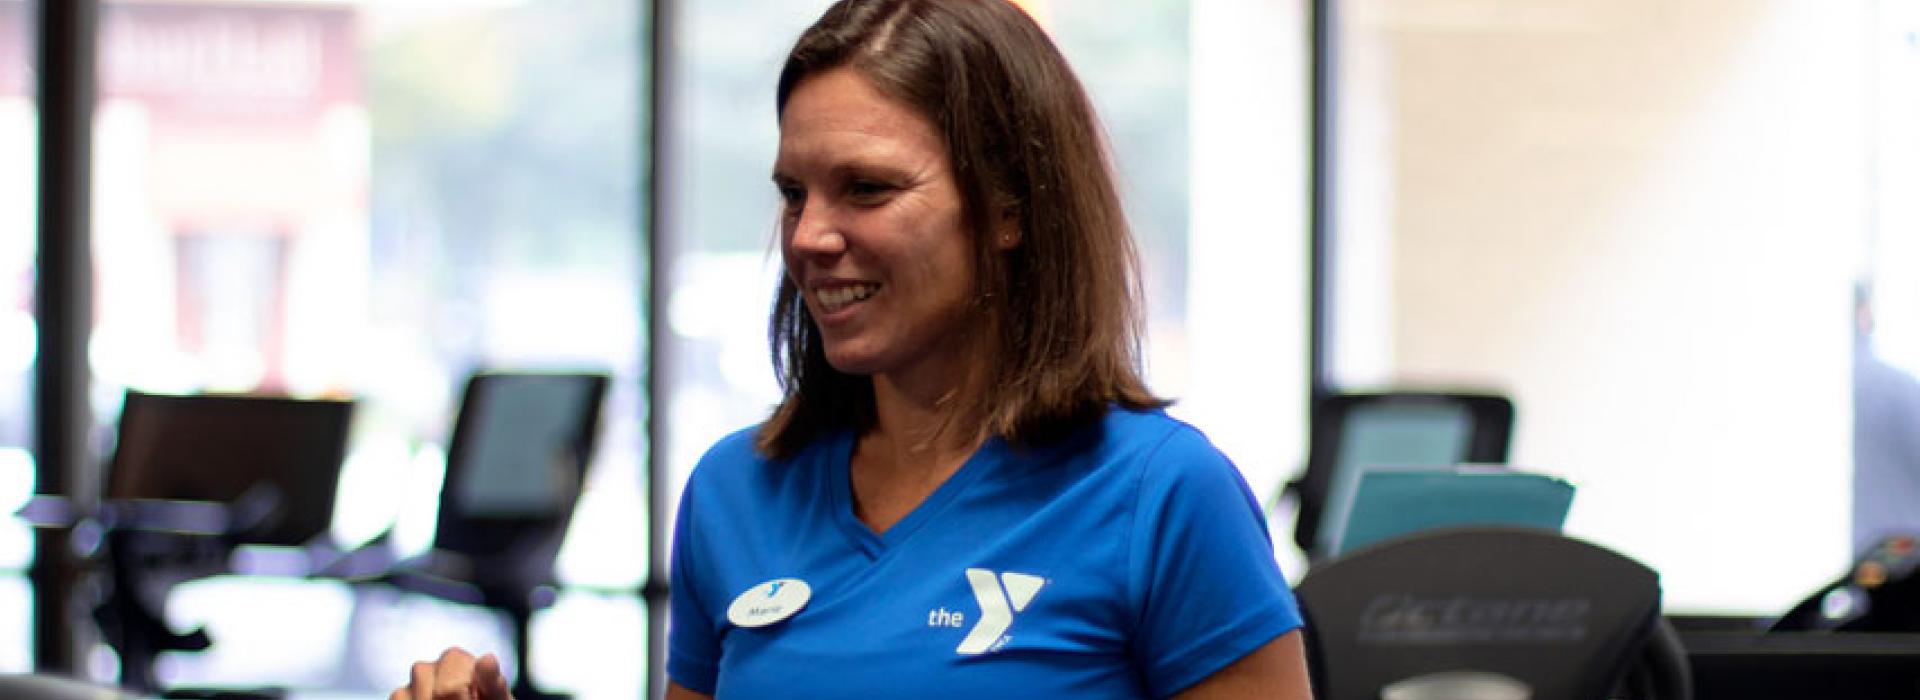 Kennett Area YMCA Personal trainer Marie Pepper speaks with a client at the wellness center in Kennett Square, PA.